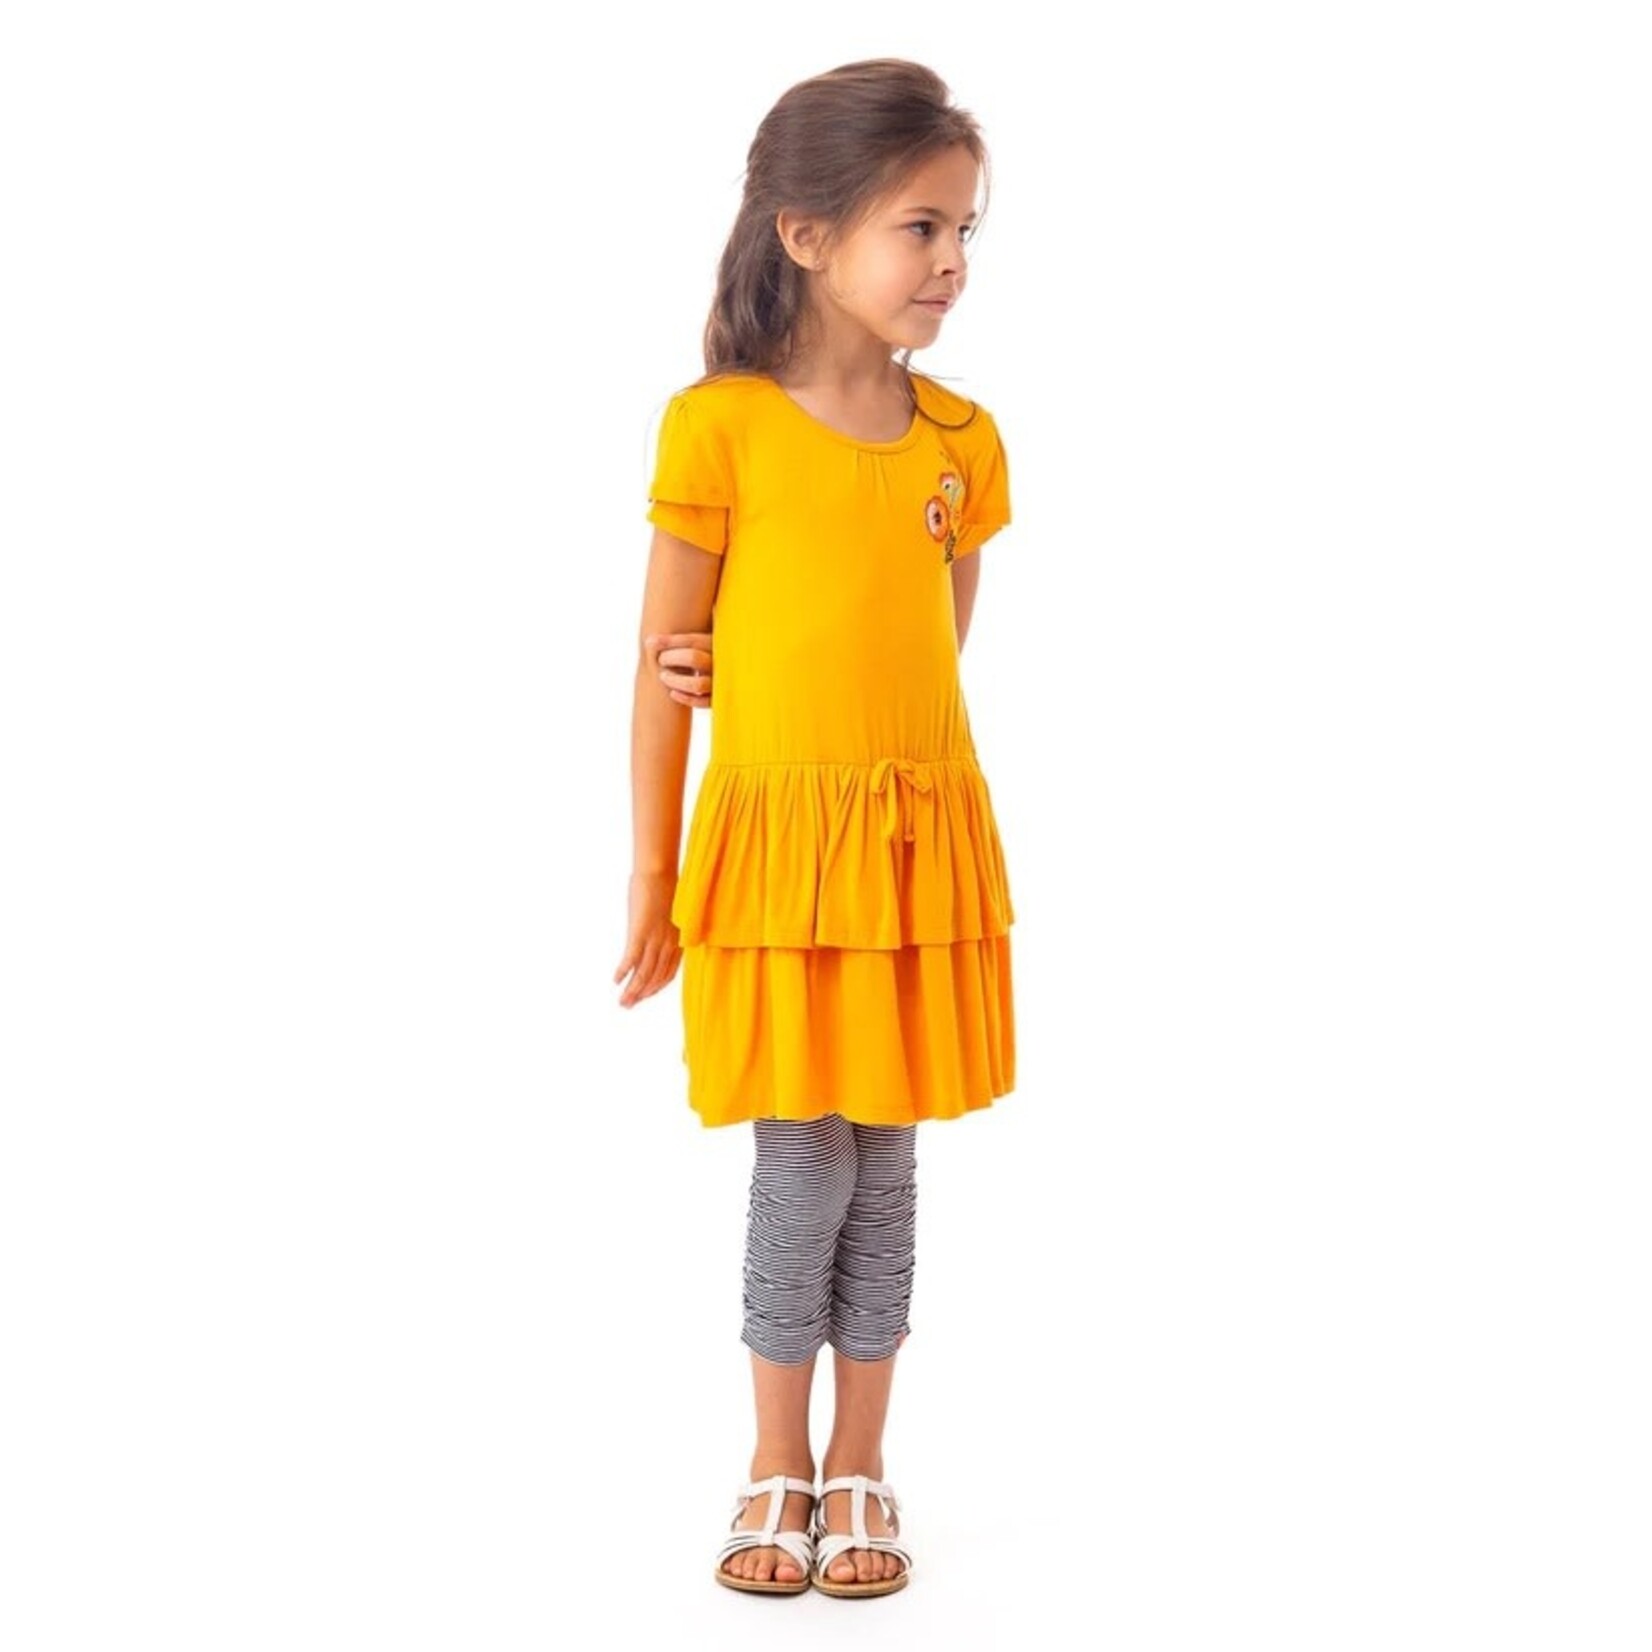 Nanö NANÖ - Sunflower yellow dress with floral embroidery at shoulder 'Pic-nic in the sun'